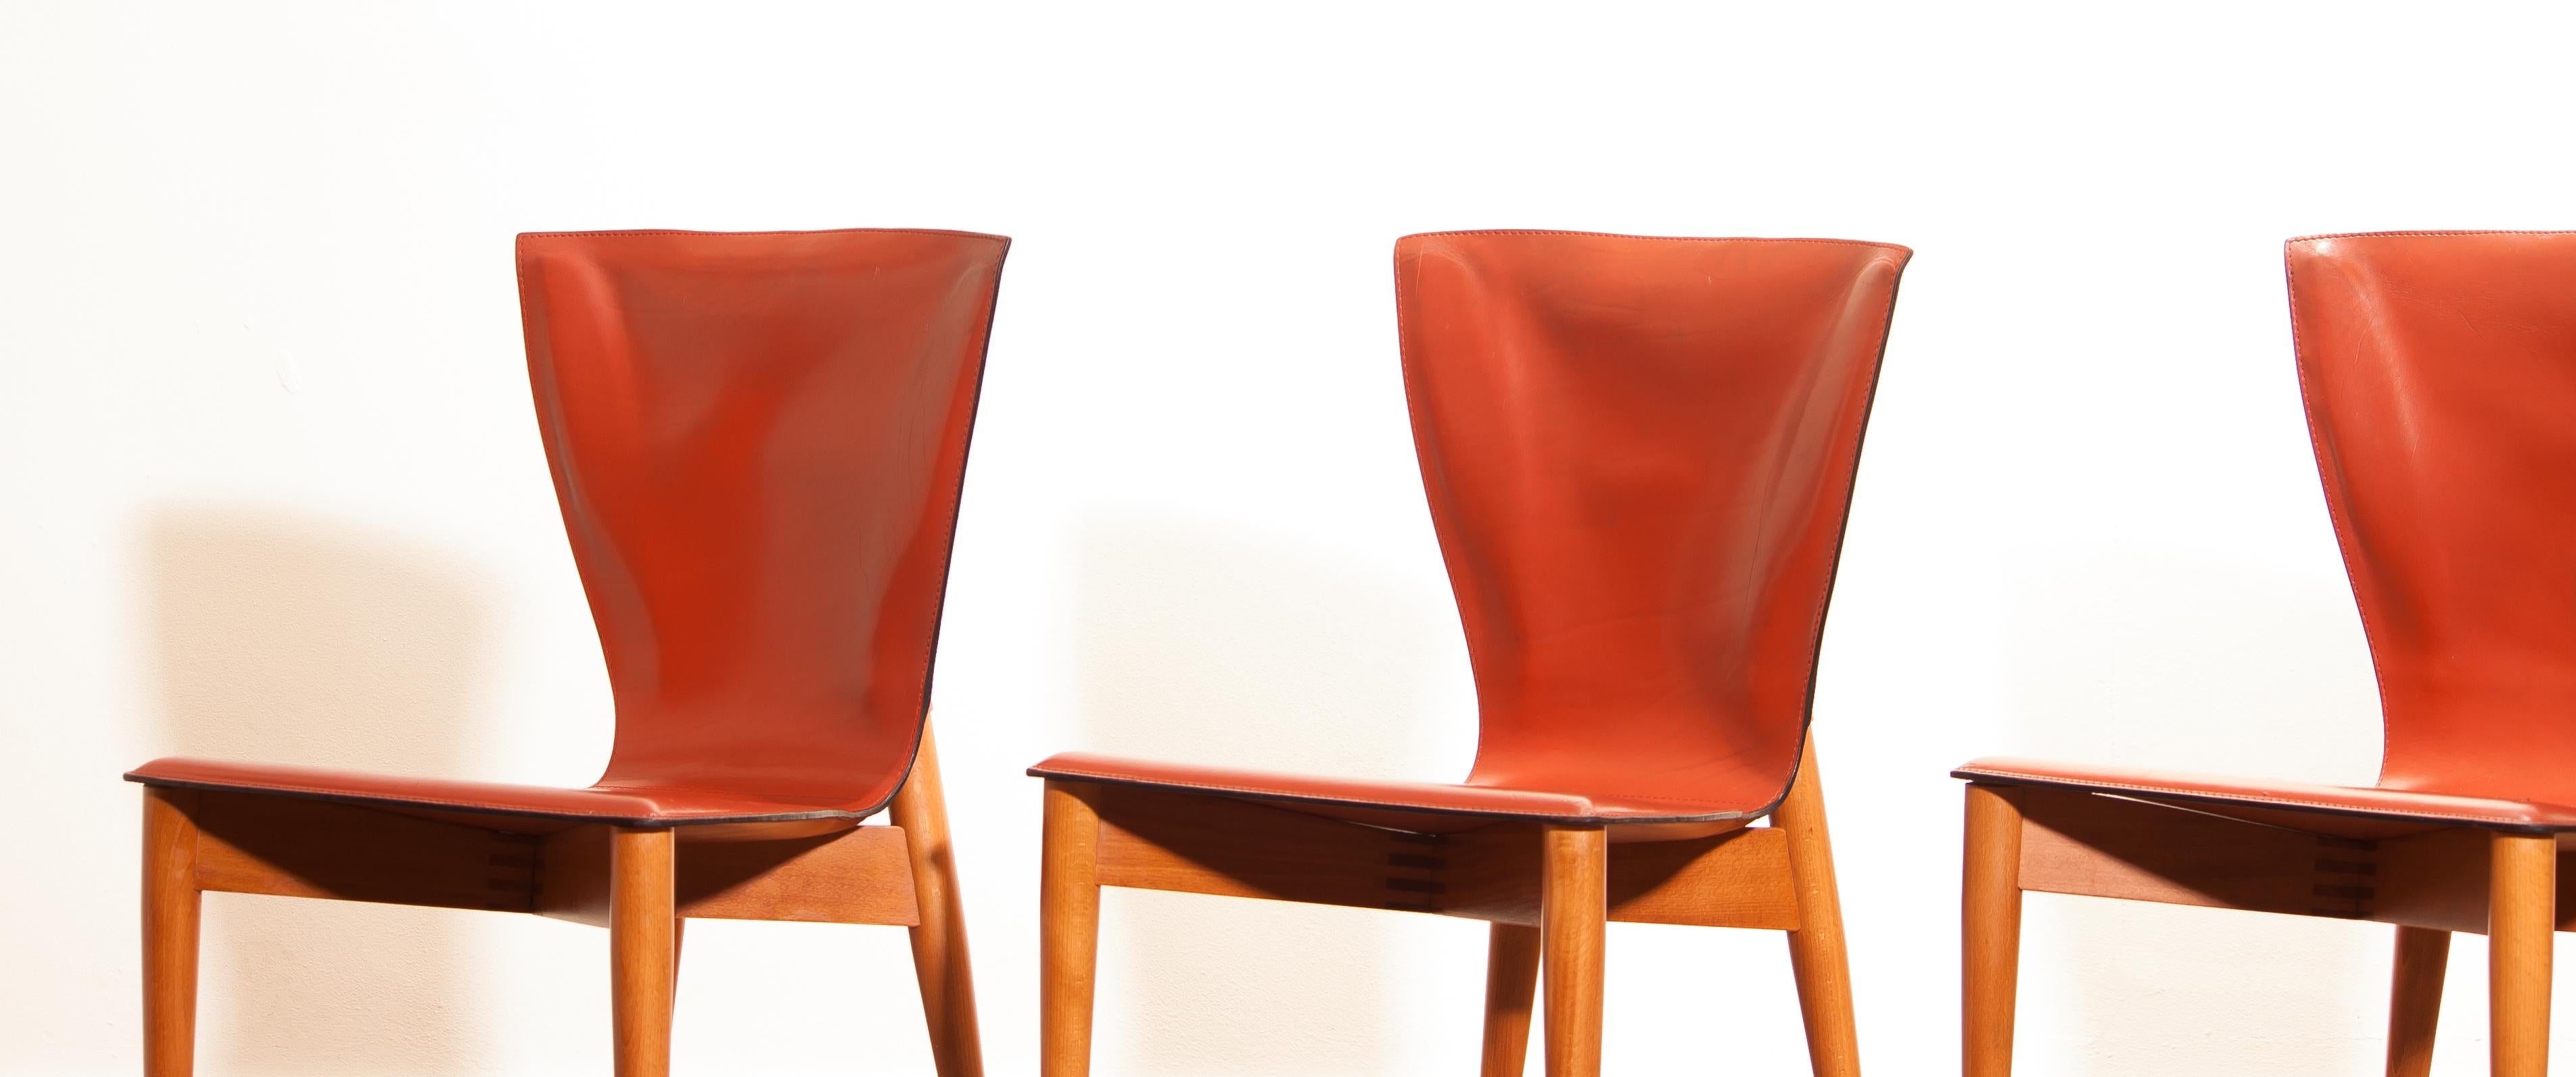 Late 20th Century 1970s, Set of Four 'Vela' Dining Chairs by Carlo Bartoli for Matteo Grassi